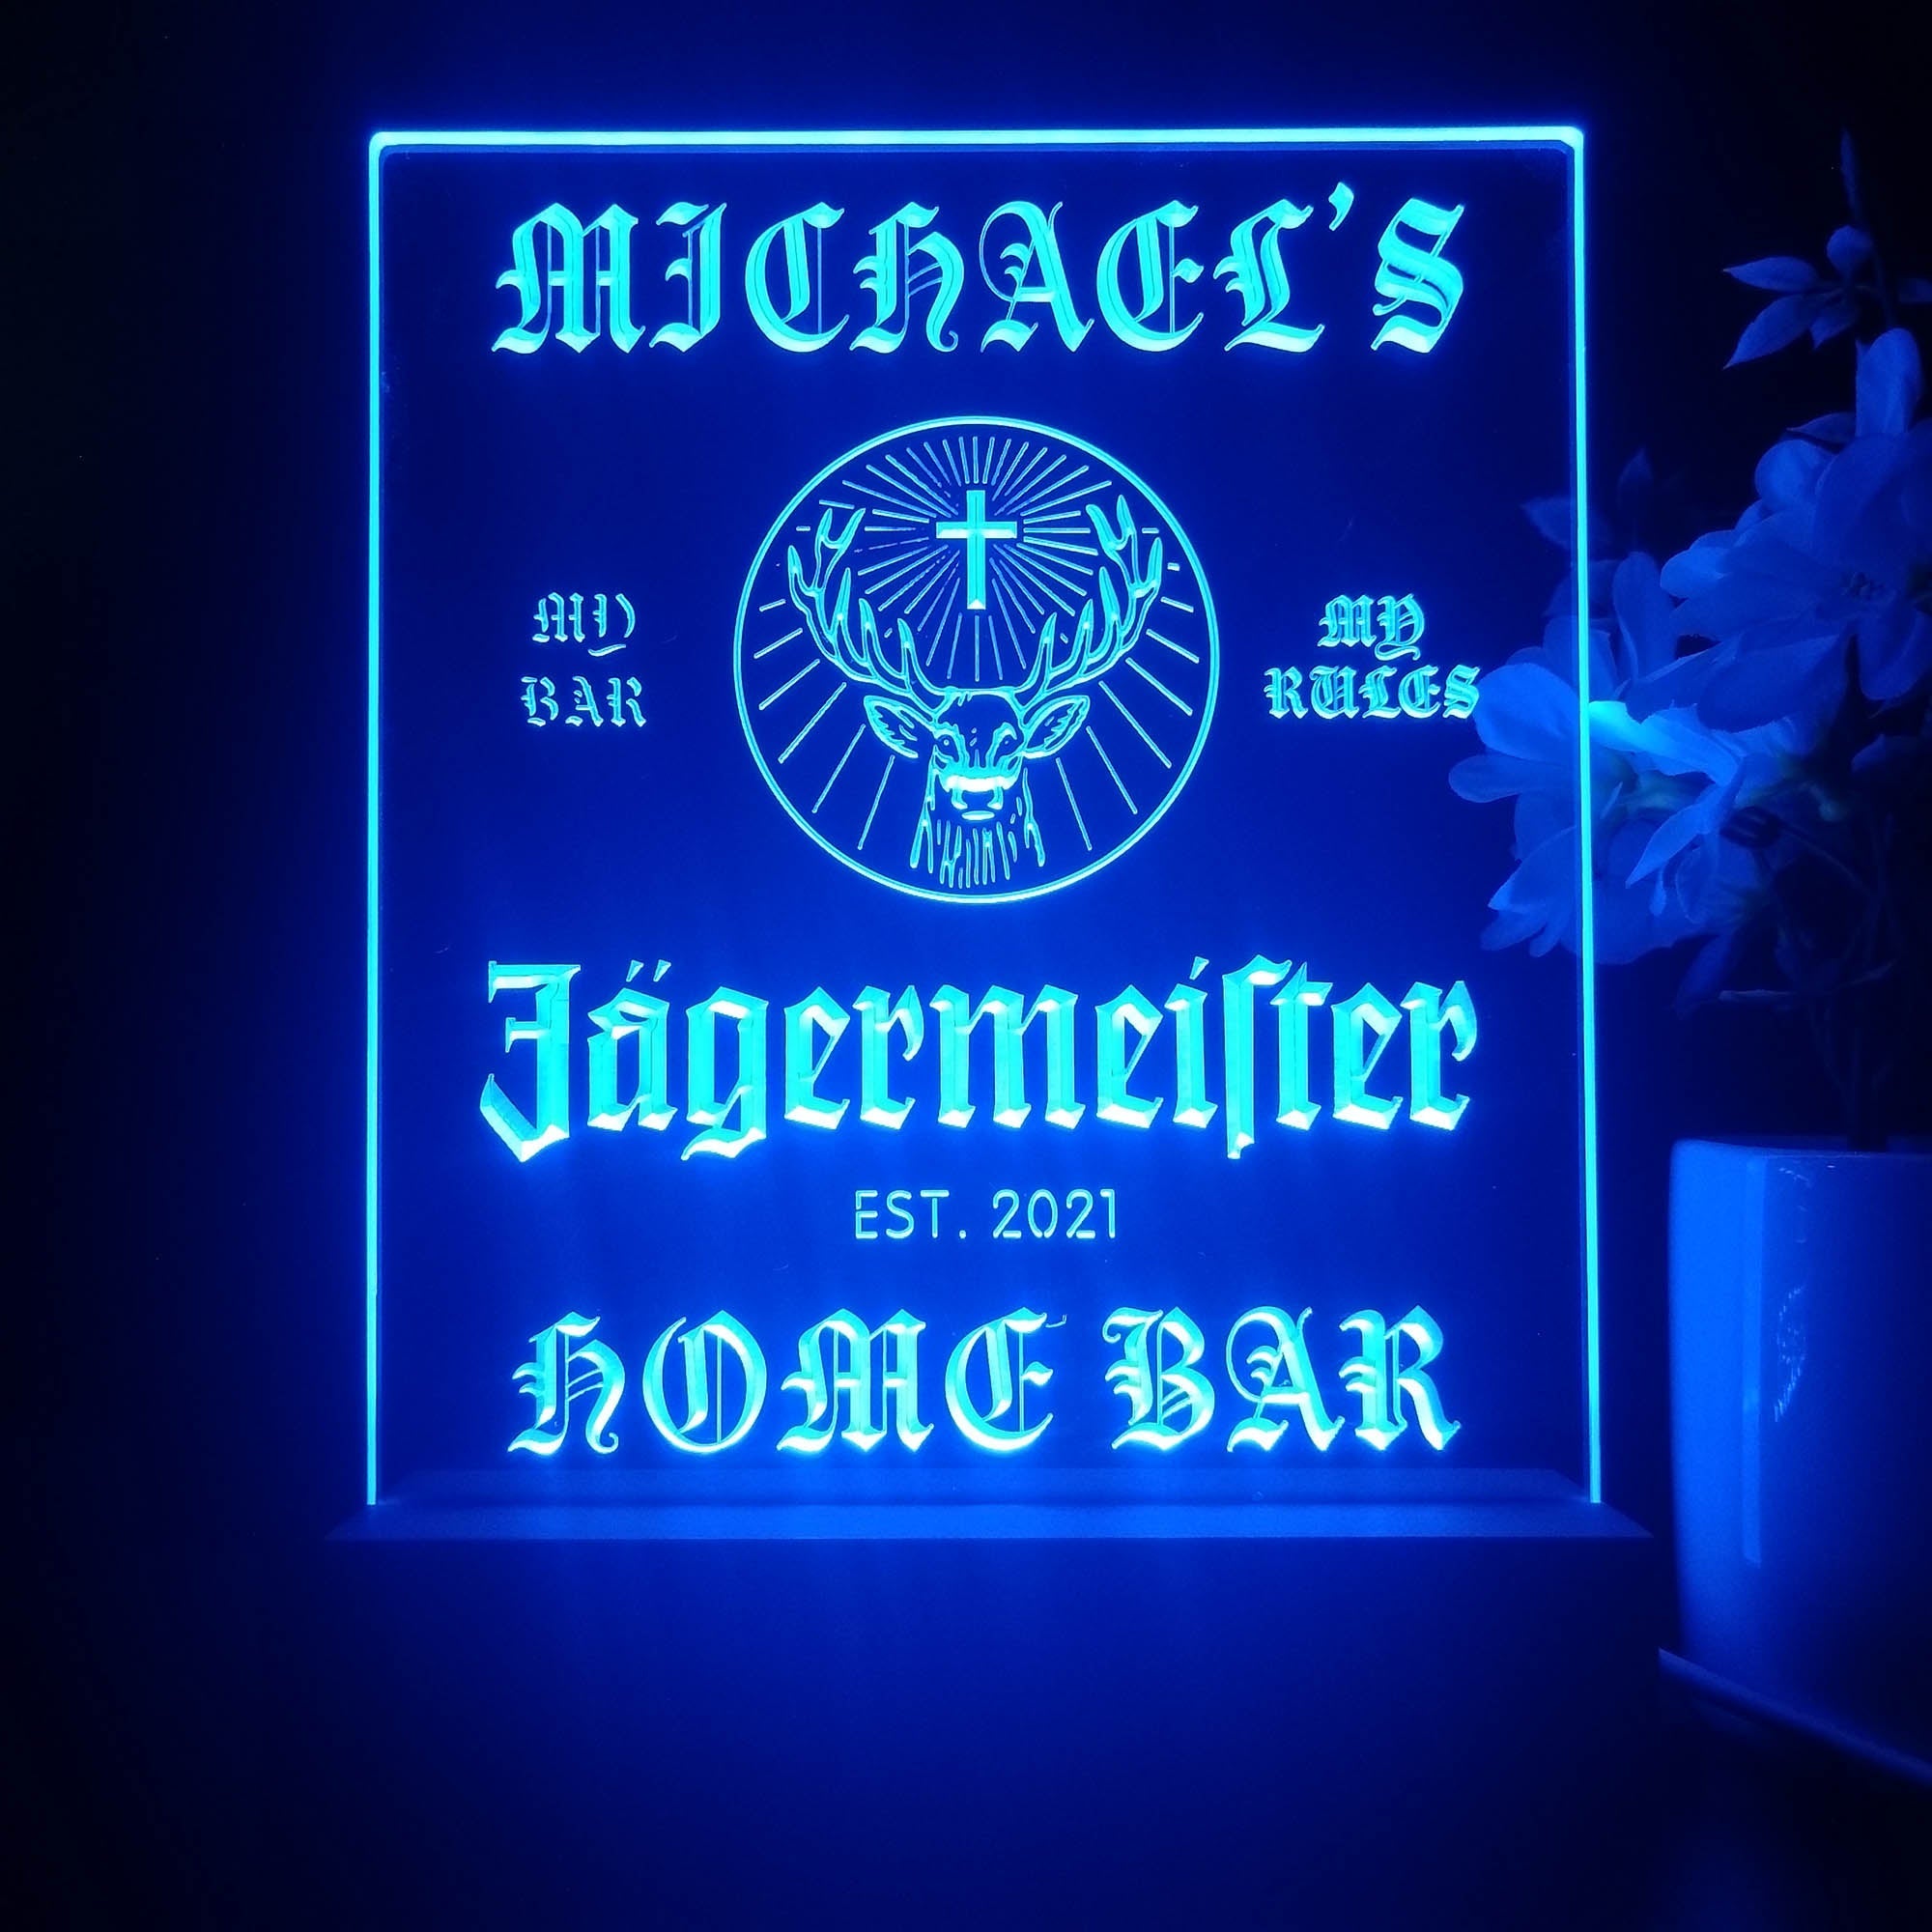 Personalized Jagermeister Souvenir Neon LED Night Light Sign